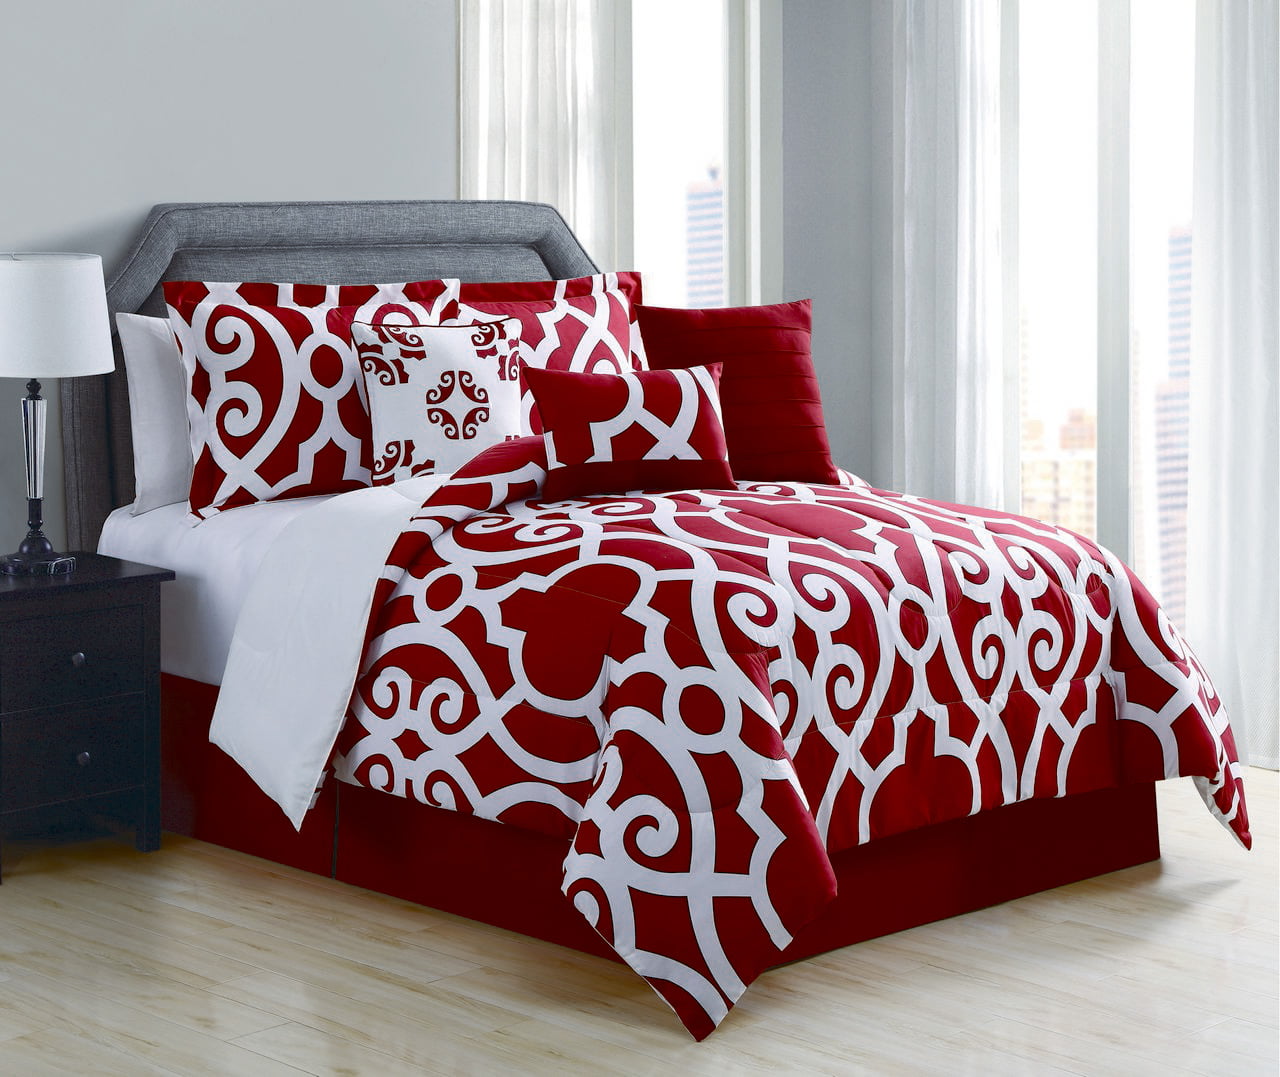 red and white comforter floral